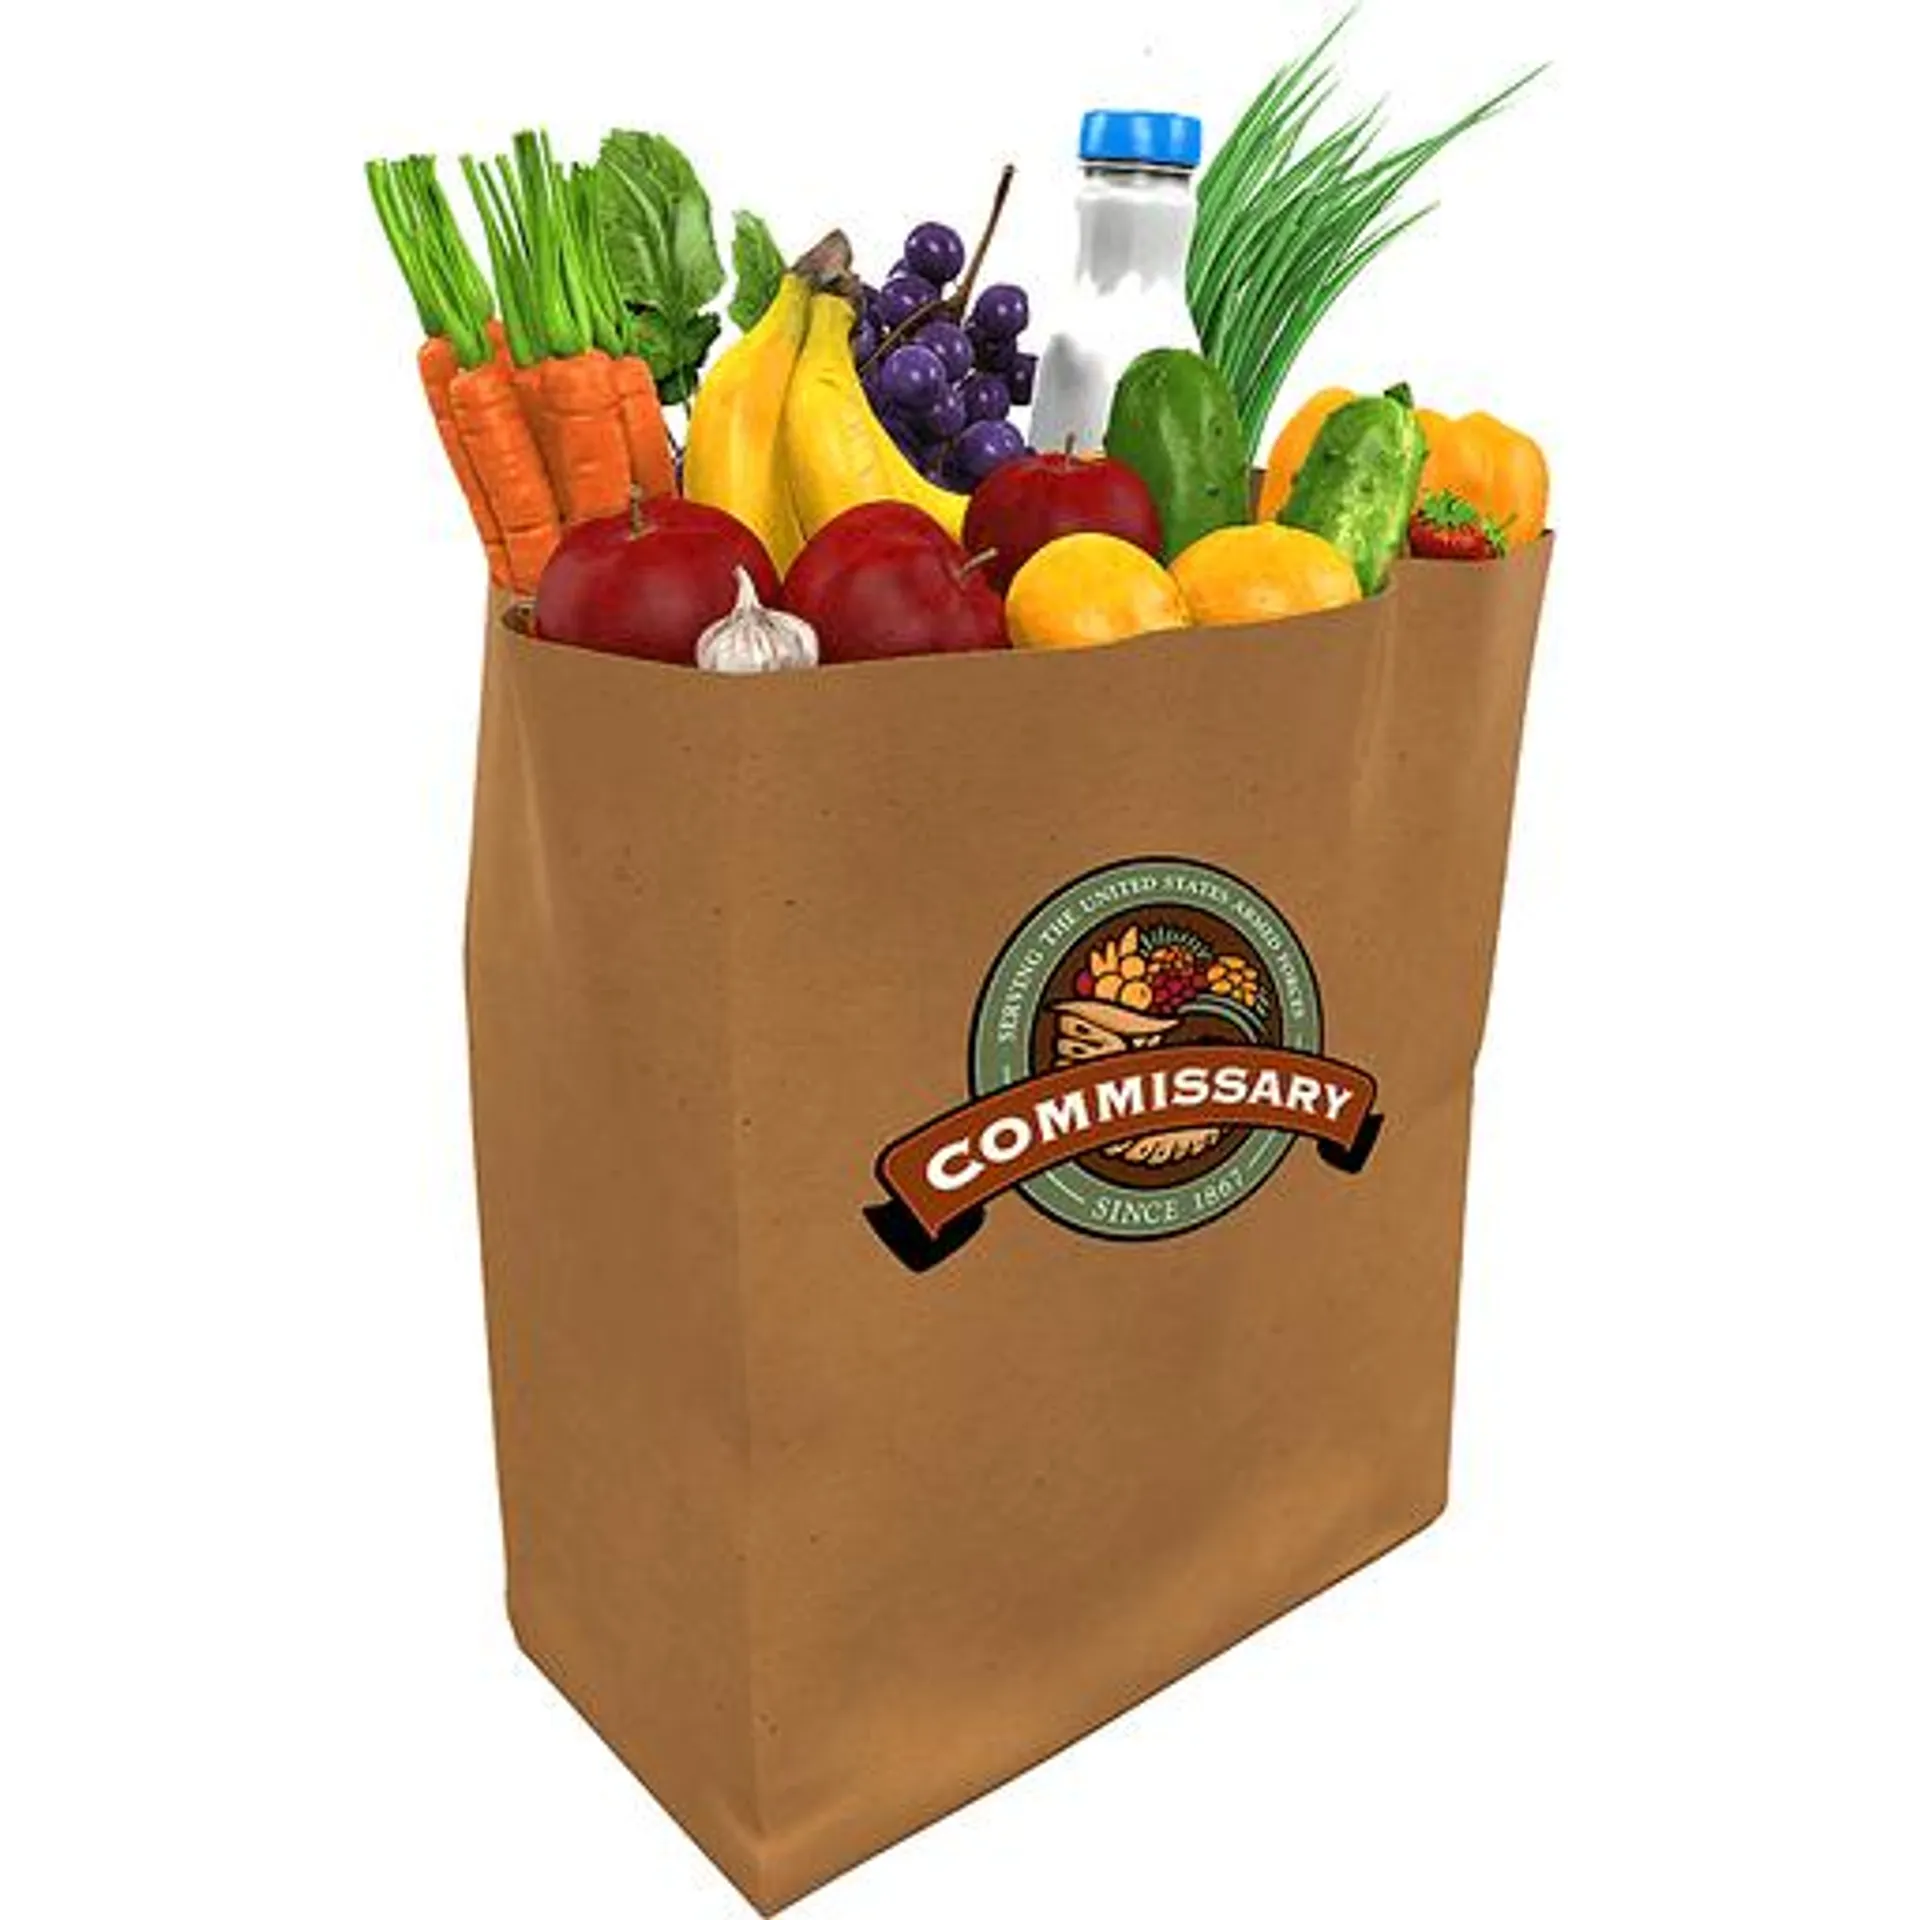 MyCommissary Website Terms and Conditions of Use